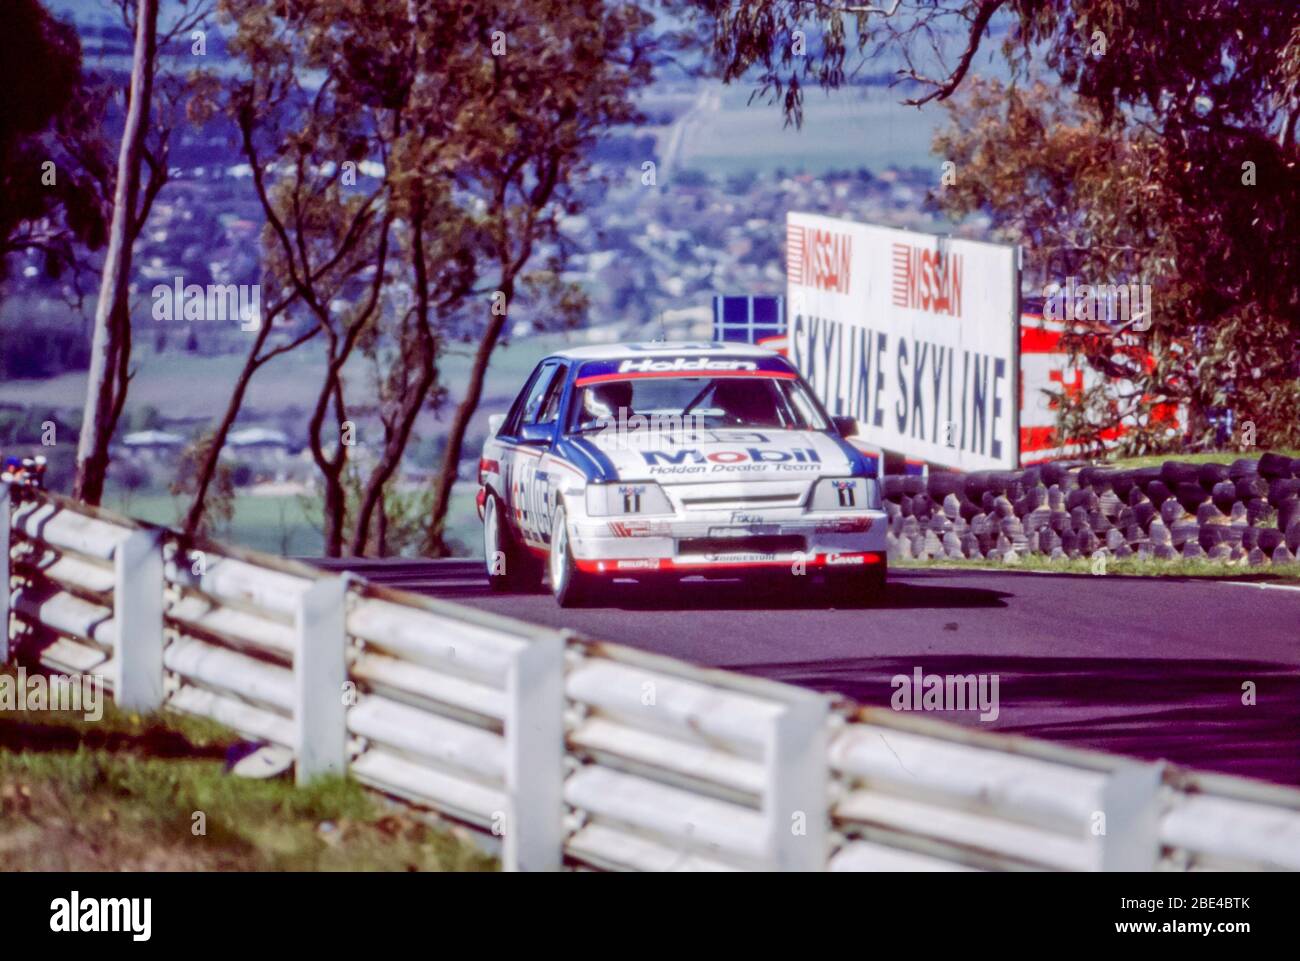 Bathurst, Australia, October 5th, 1986: Legendary Australian motor racing driver Allan Moffat teamed up with Peter Brock in his 05 Mobil Commodore. Seen here racing on an uphill section of the 1986 James Hardie (Bathurst) 1000 race. They finished in an admirable 5th place after losing a three lap advantage during pit repairs on the 1000km race. Brock and Moffat between them, had won 12 of the 16 previous races at the Bathurst circuit in Australia. Stock Photo